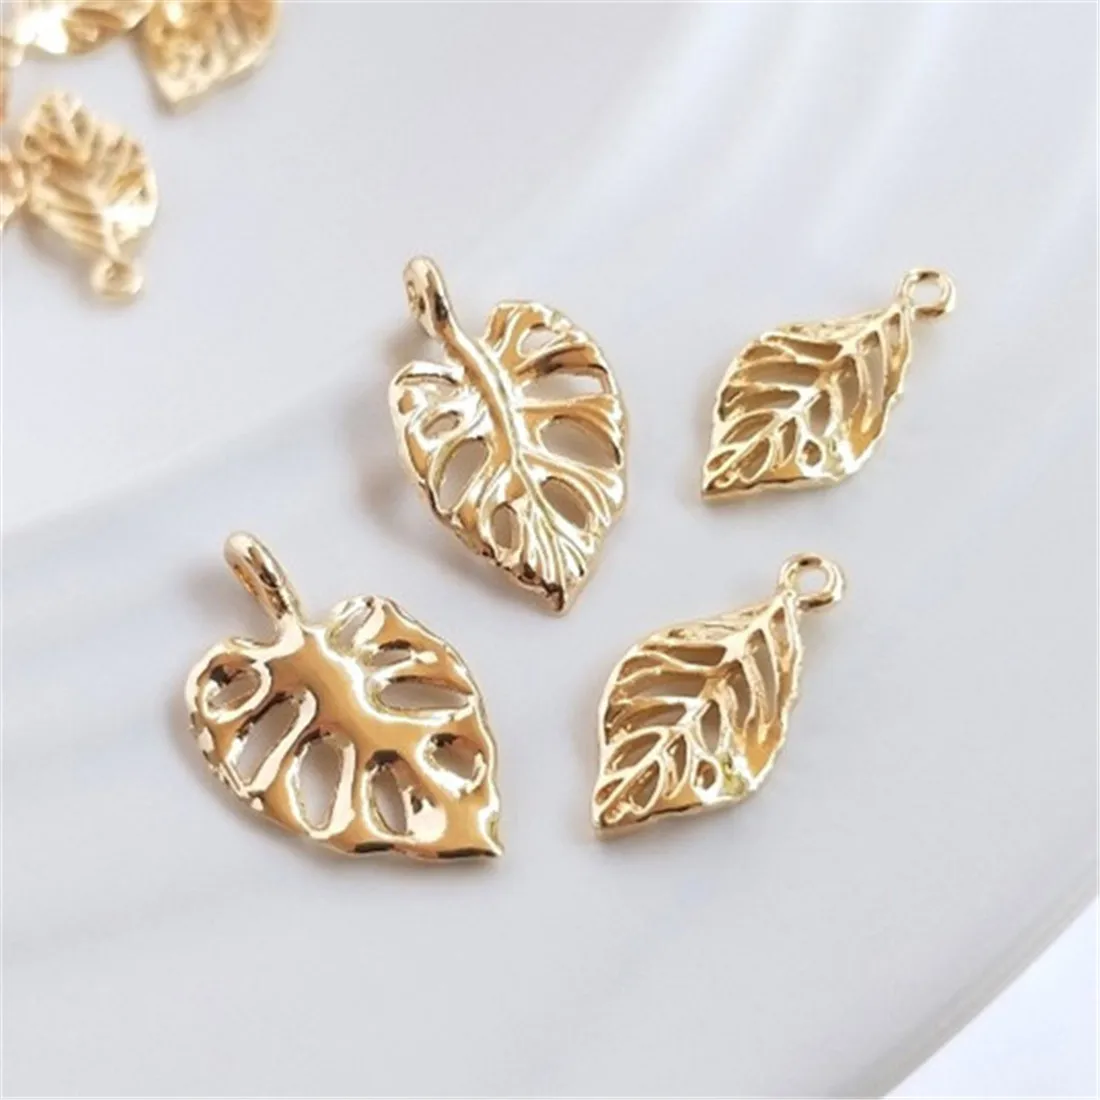 

14K Gold Wrapped Accessories, Hollowed Out Three-dimensional Leaf Pendant DIY Handmade Bracelet, Headpiece, Pendant, Earrings